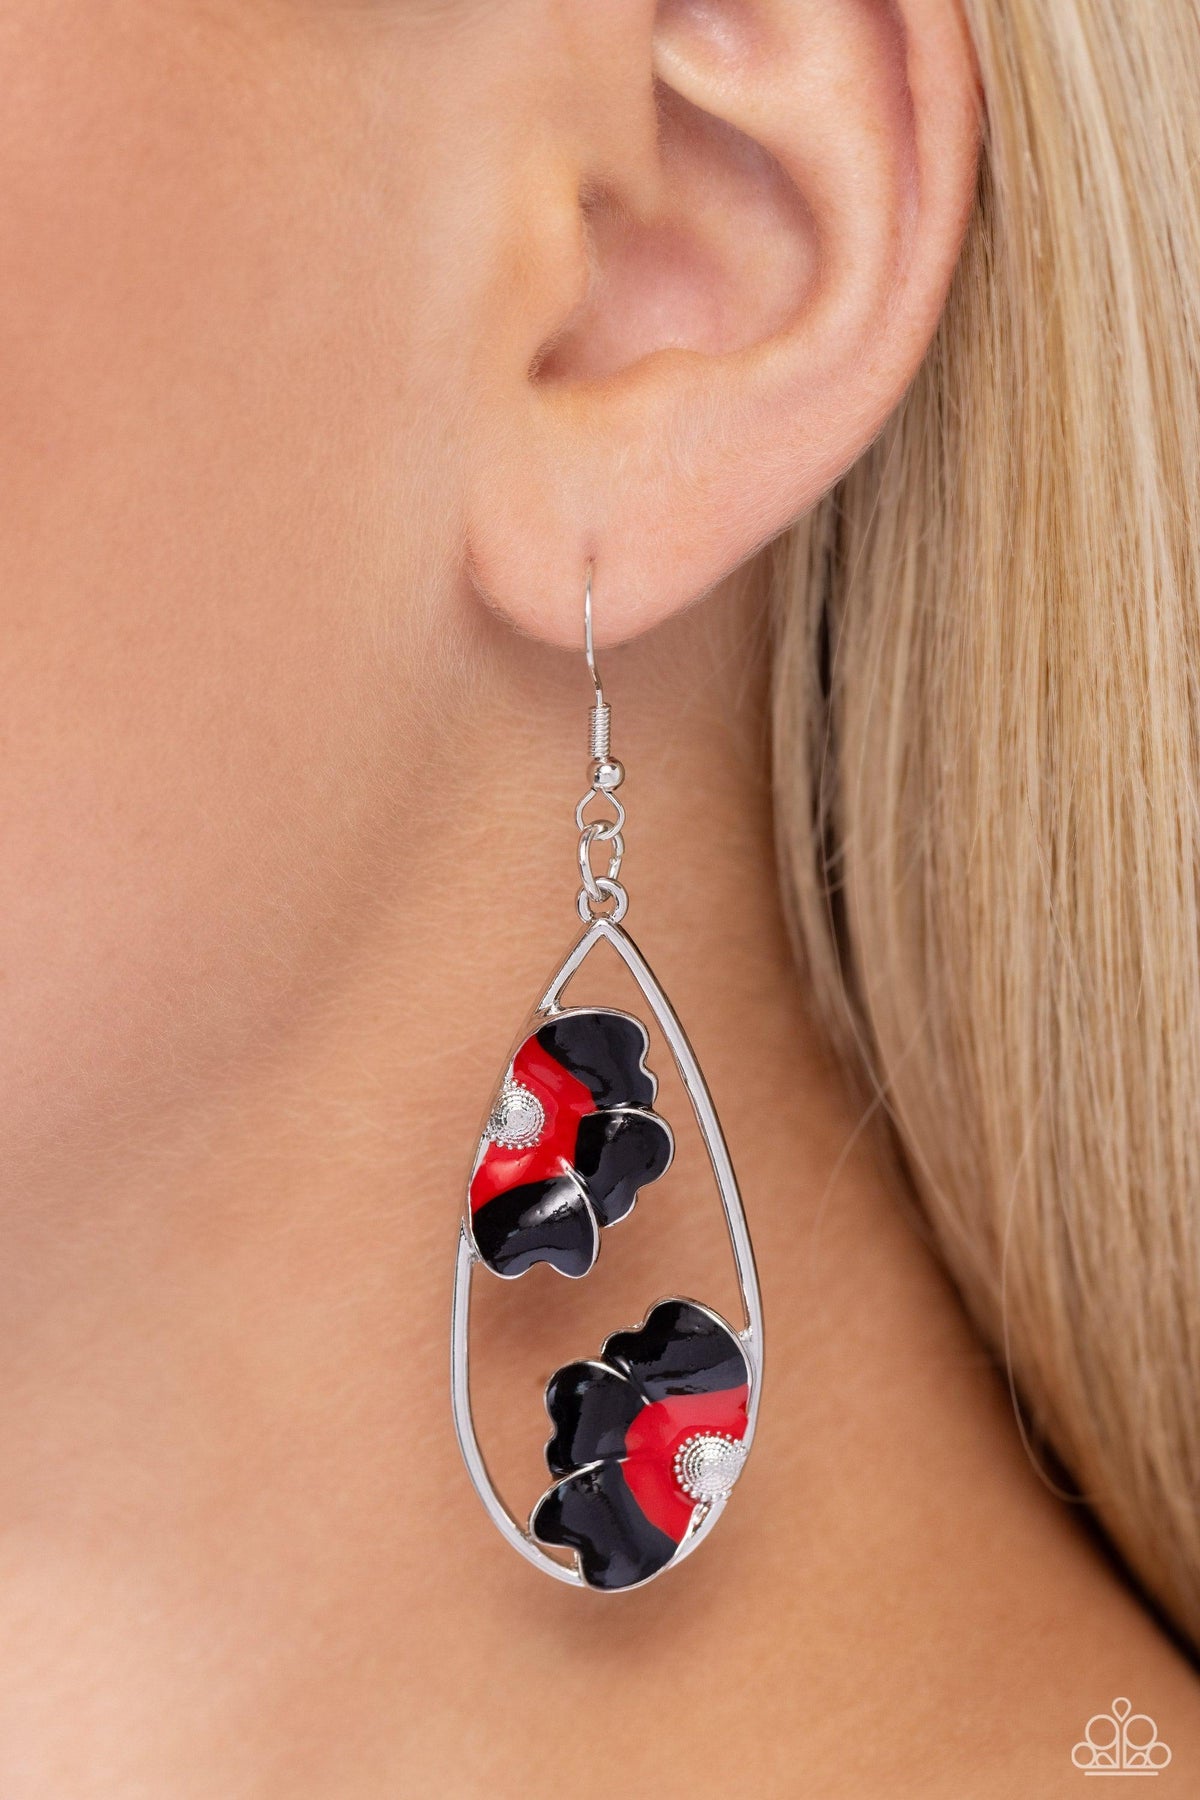 Airily Abloom Black &amp; Red Flower Earrings - Paparazzi Accessories-on model - CarasShop.com - $5 Jewelry by Cara Jewels